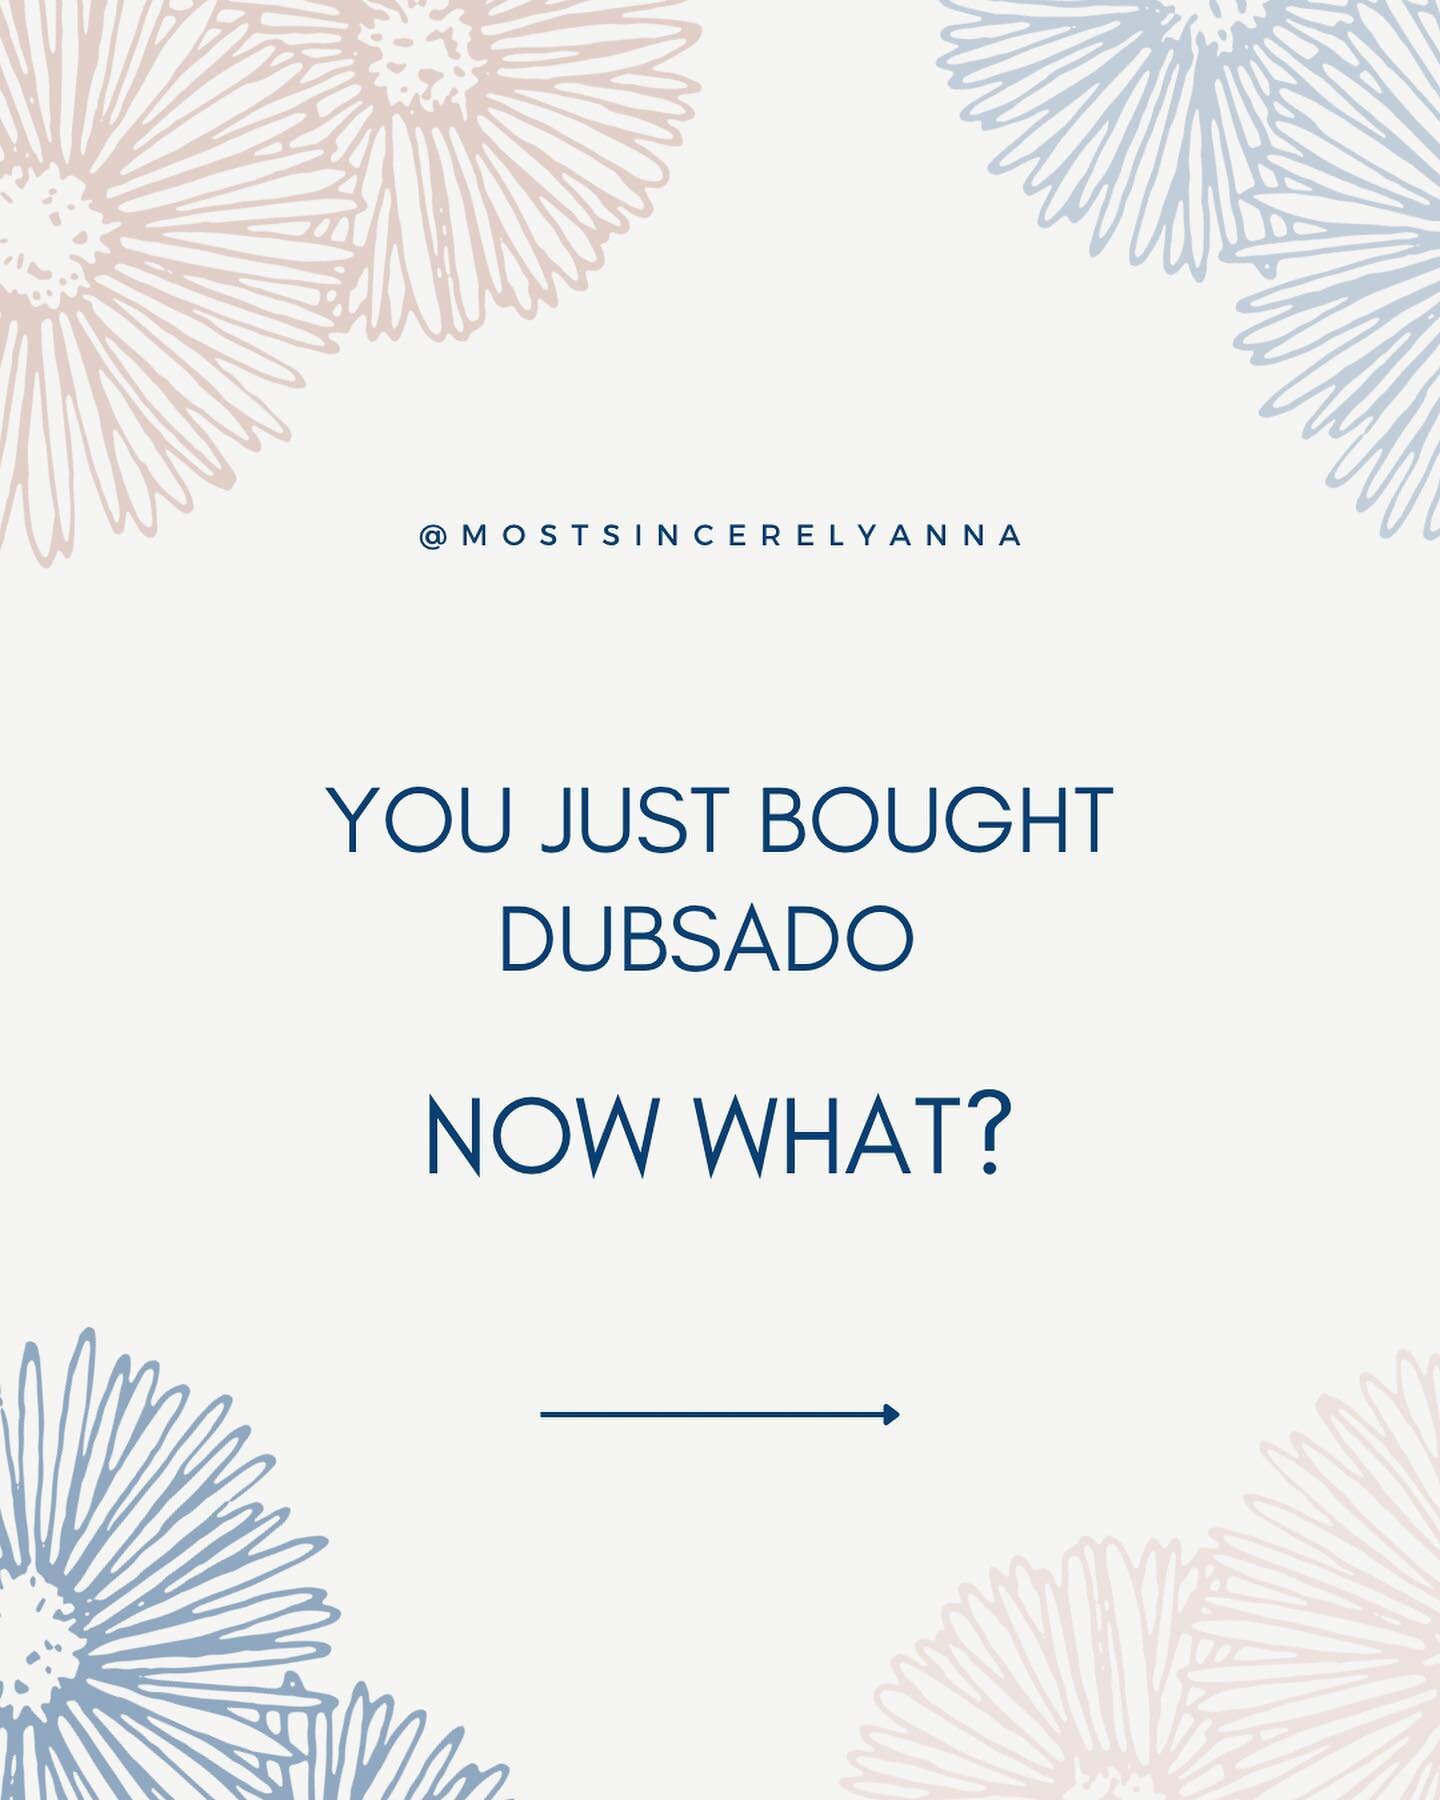 Instant analysis paralysis anyone?! 🙋&zwj;♀️

Dubsado is an amazing CRM that allows you to seamlessly manage clients, process payments, streamline workflows, and much much more! 

With all that awesomeness comes a steep learning curve, I won't lie.
